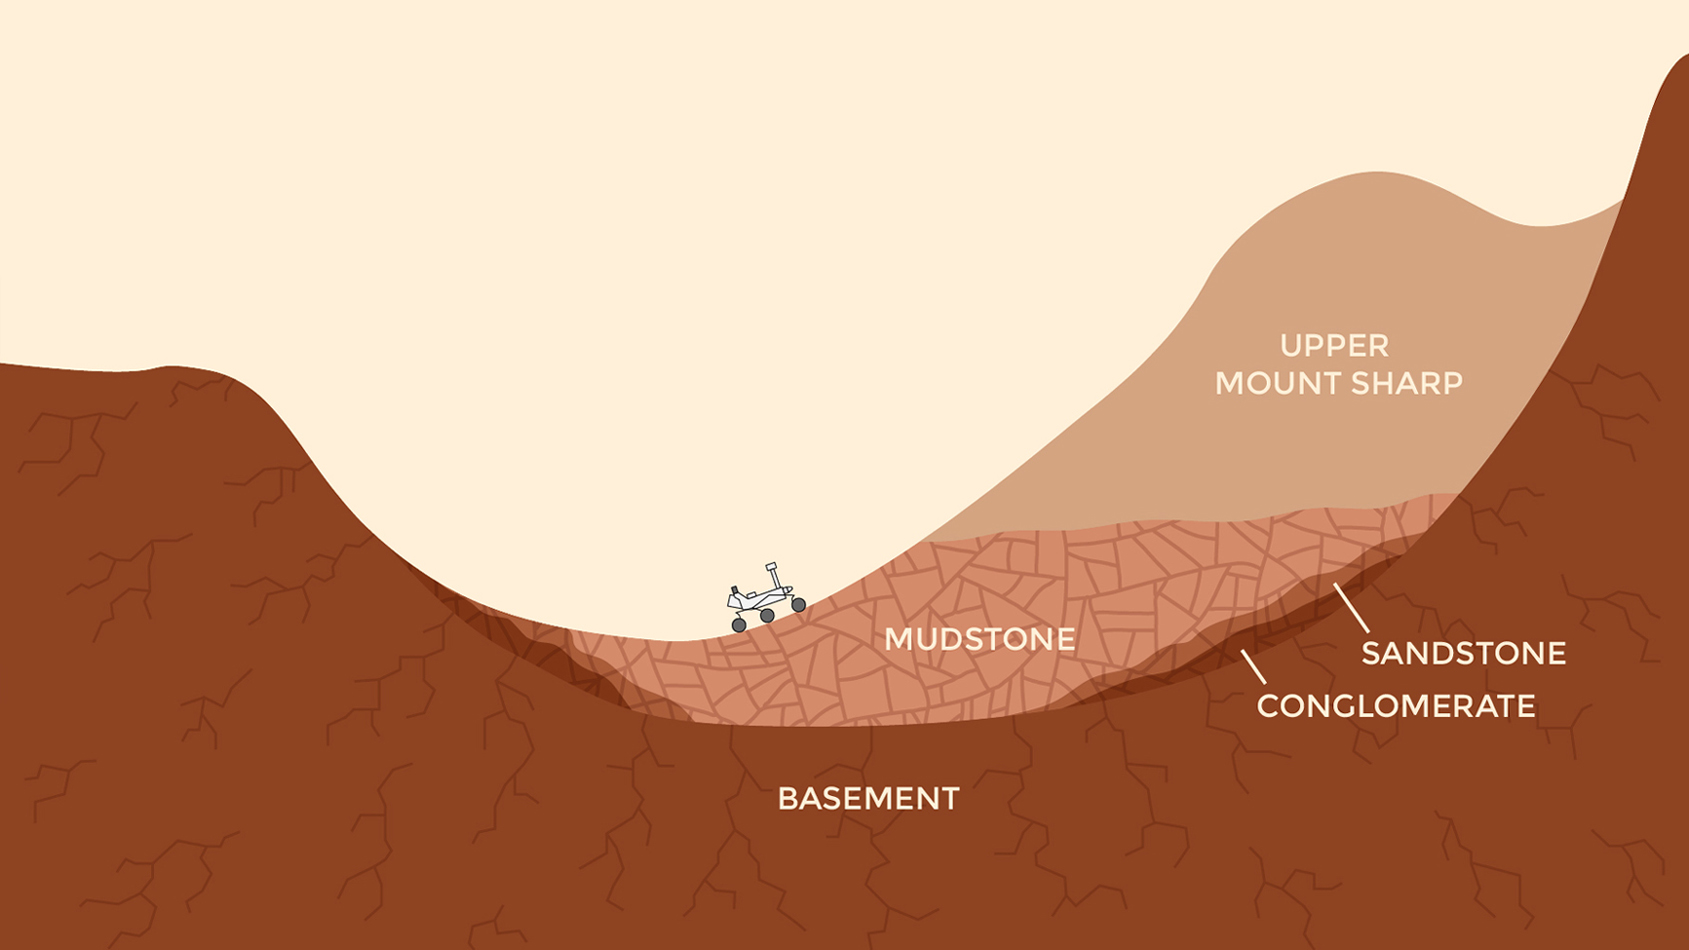 Illustration of the present-day, northern portion of Gale crater, showing the locations of mudstone, sandstone, conglomerates and other rock units. Image Credit: NASA/JPL-Caltech